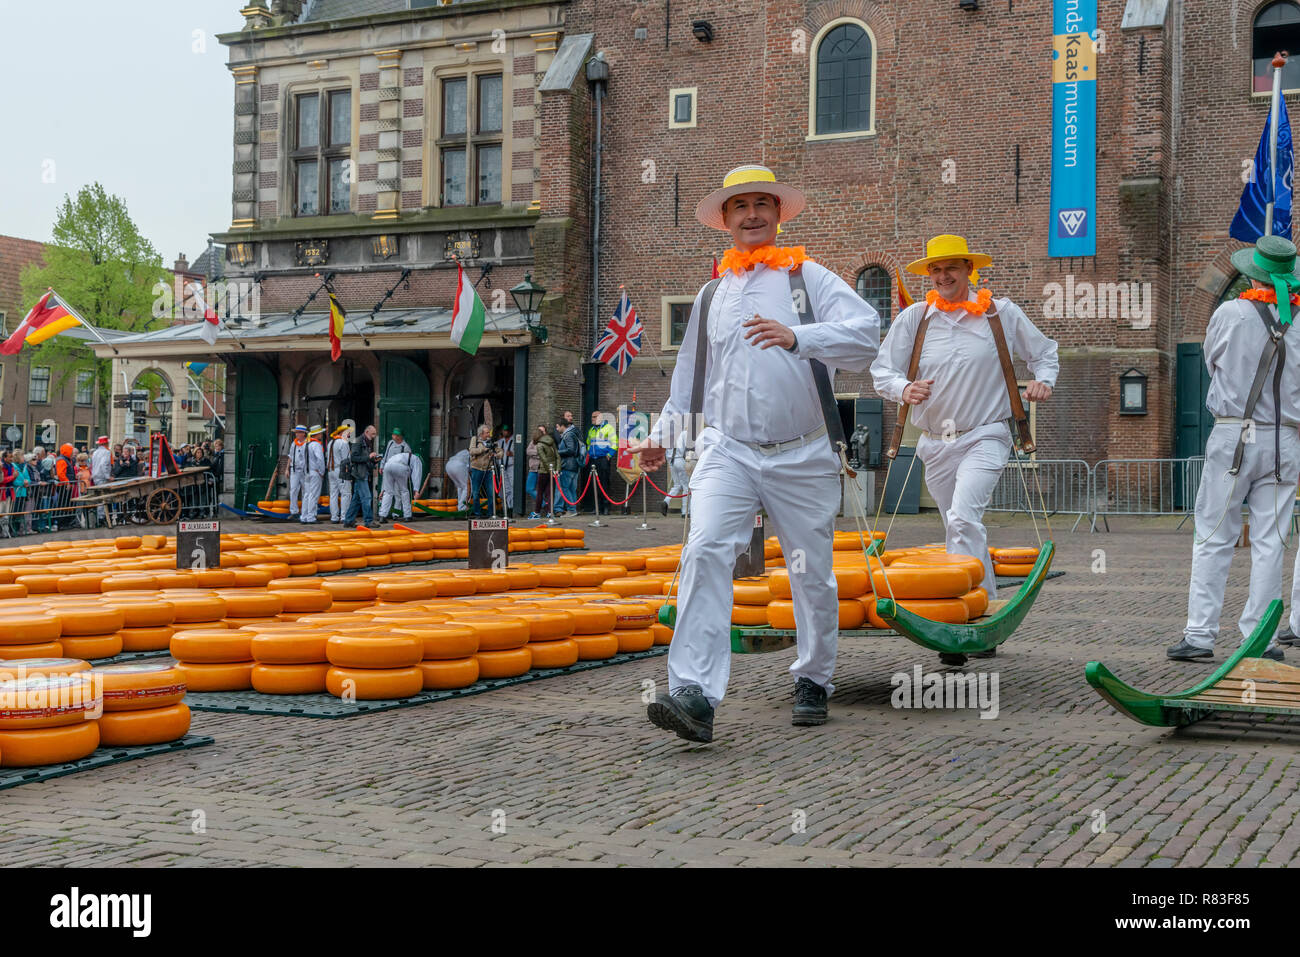 The entertaining cheese market takes place on the Waagplein in Alkmaar each week during spring and summer, Holland, The Netherlands Stock Photo